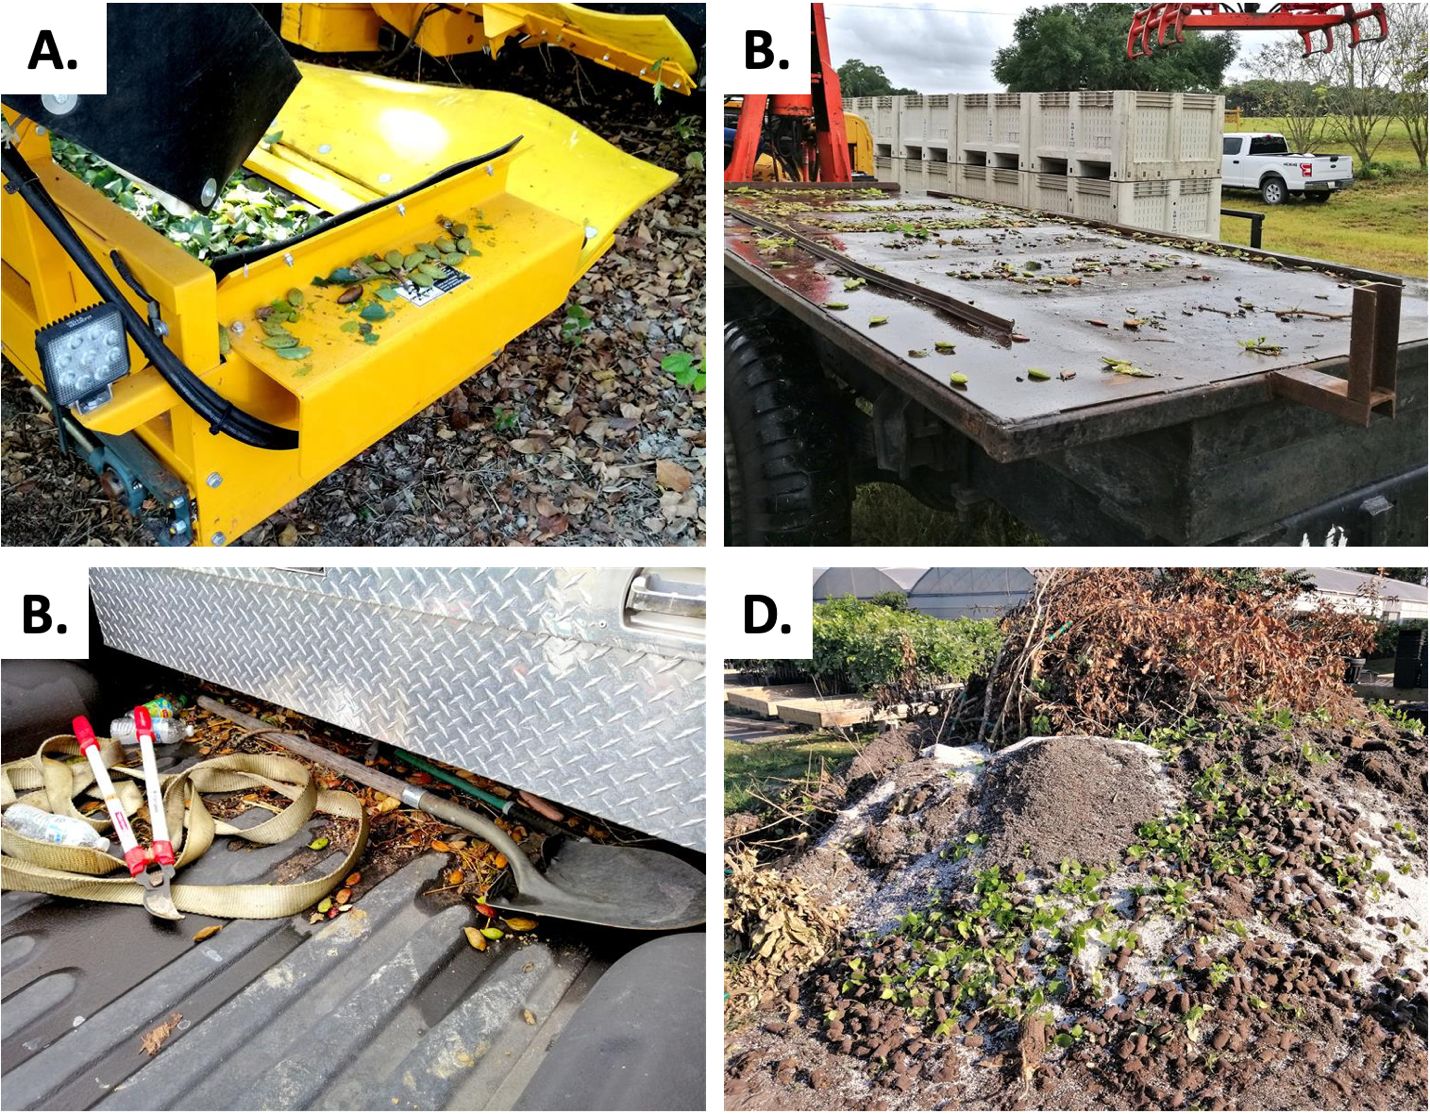 Machinery used during harvest and pruning accumulating loose seeds which may escape during transport (A–C) and nursery waste containing viable propagation materials such as rejected rootstock and seed (D). 